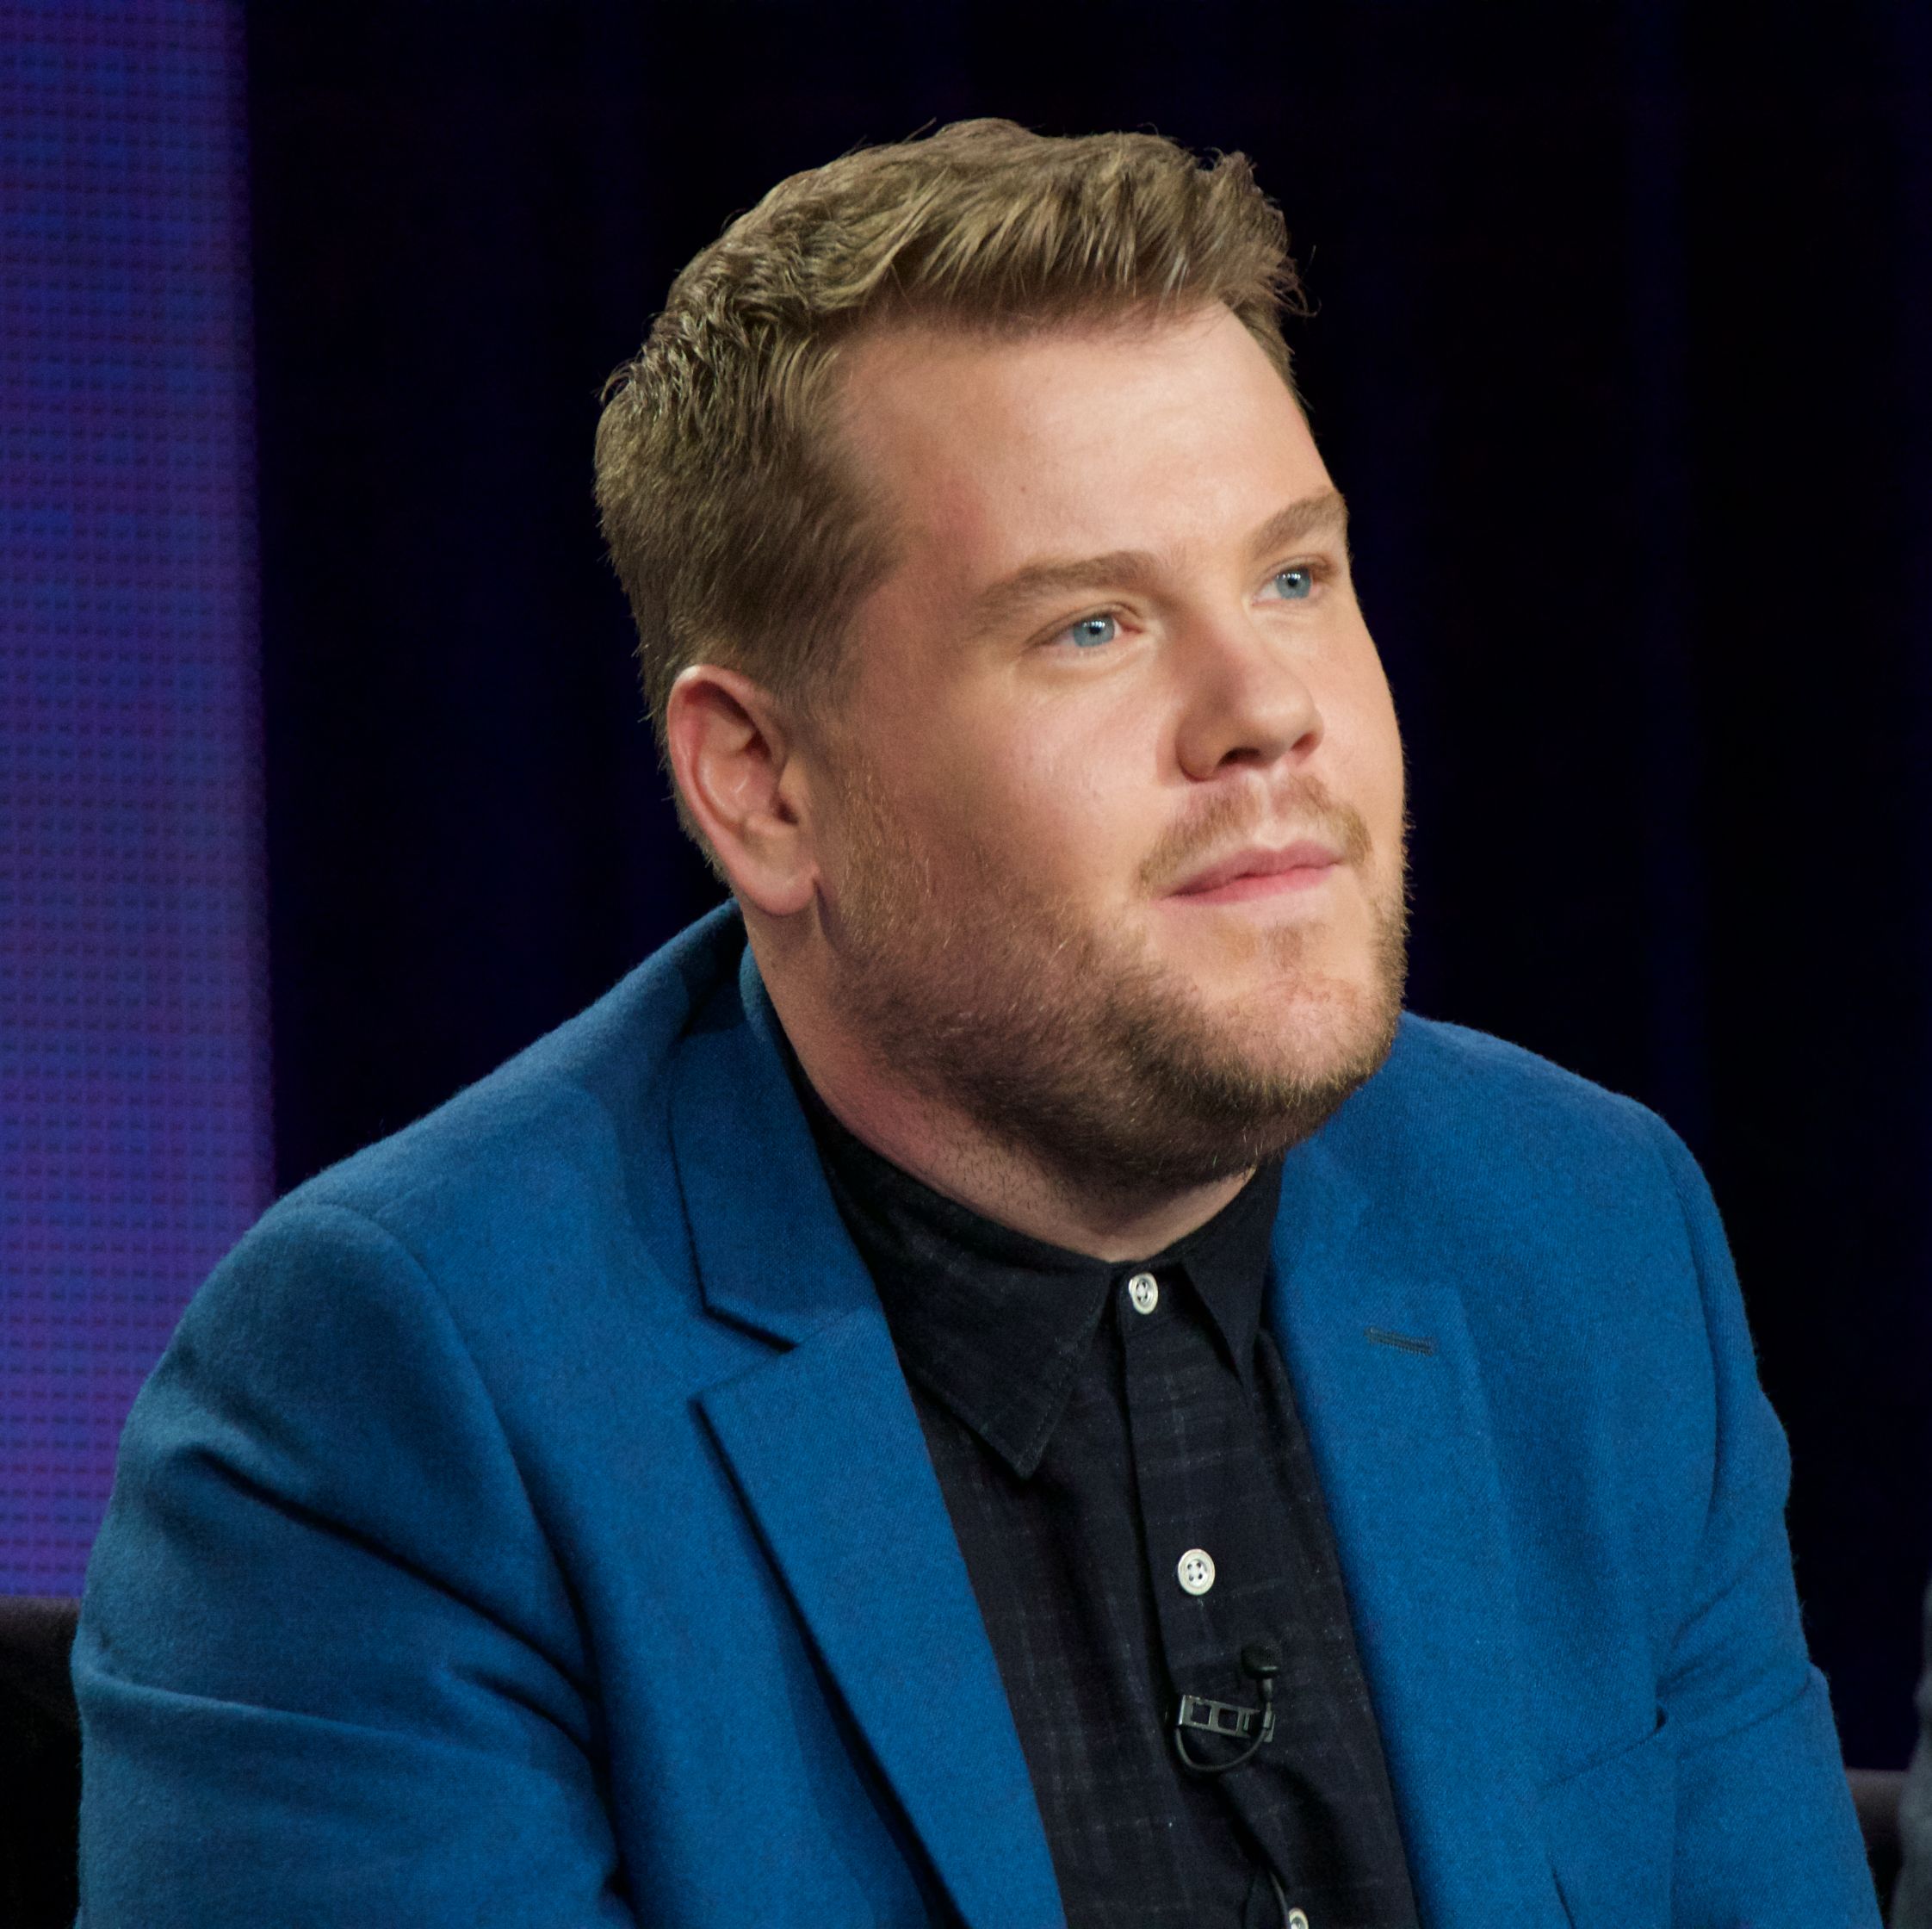 James Corden Slams Balthazar Drama and Calls Out NYT for Asking About It: 